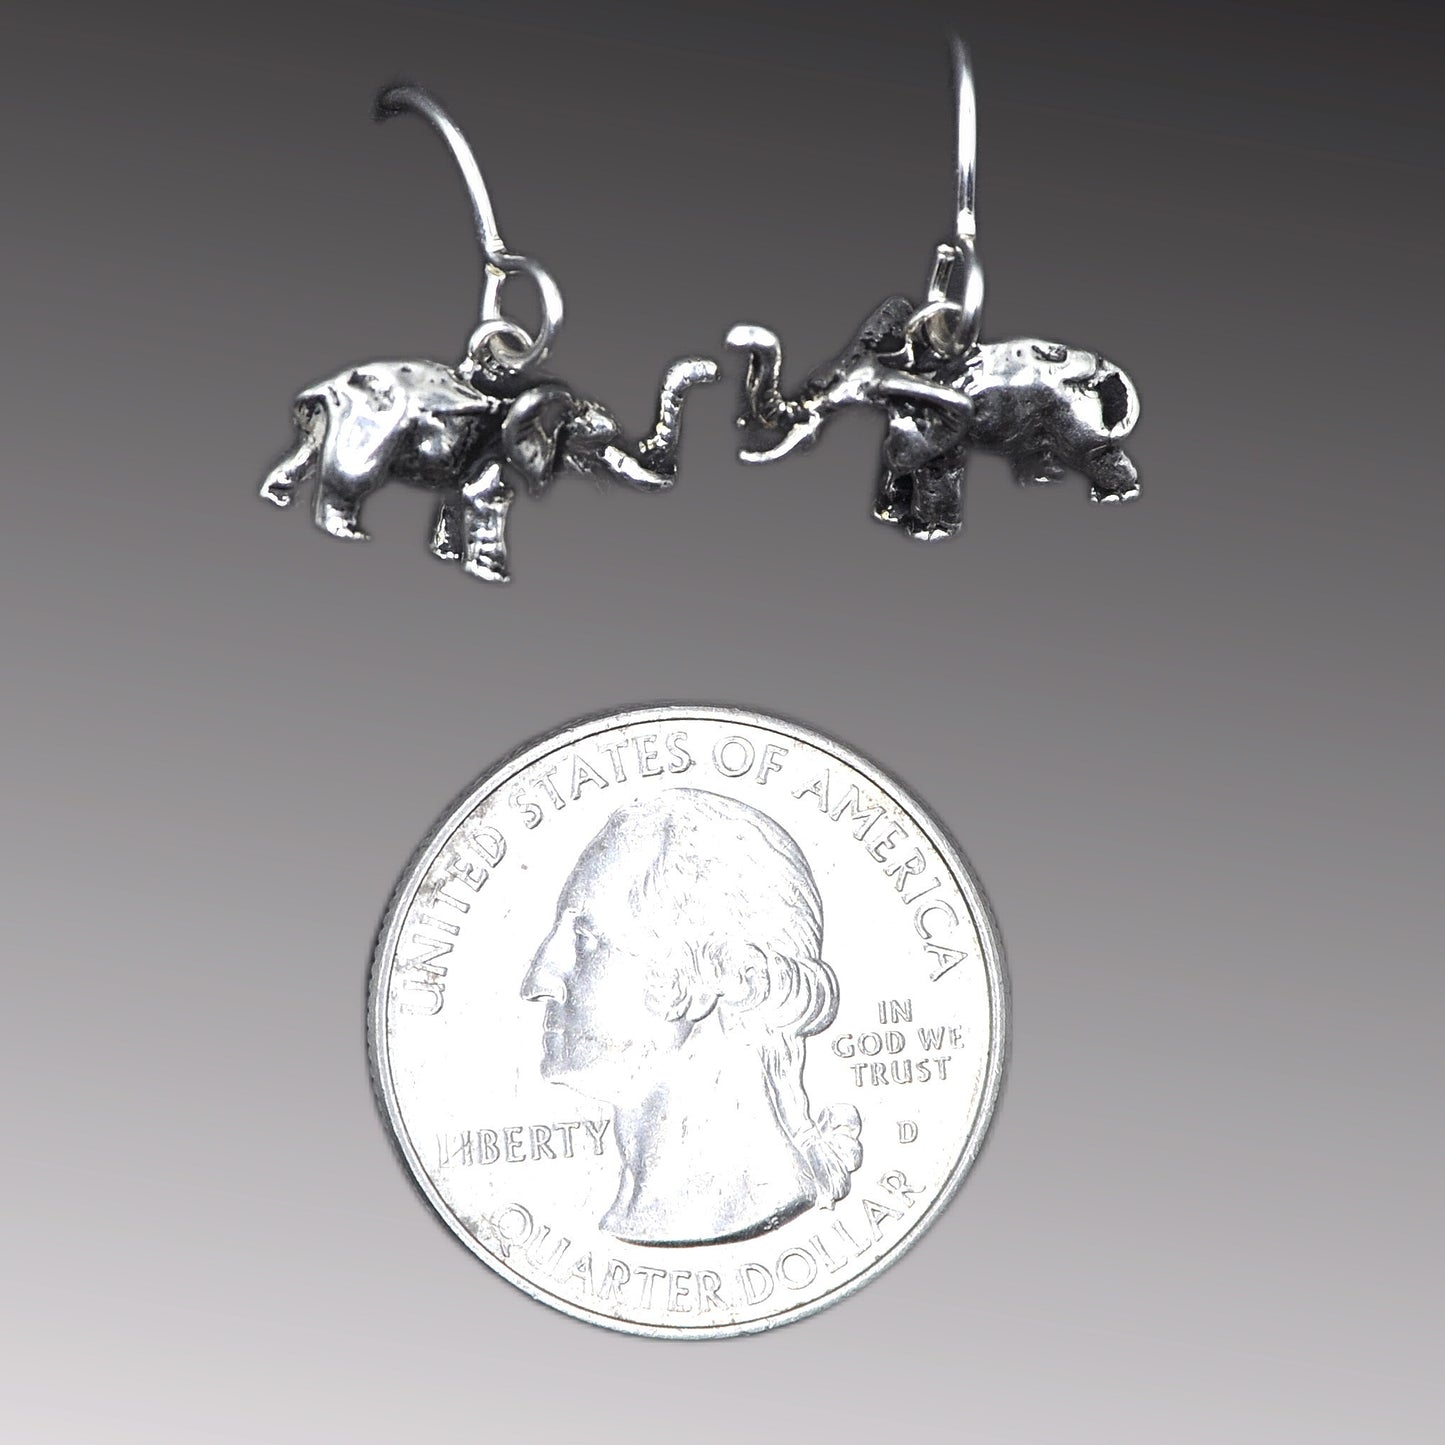 Elephant Earrings, Sterling Silver with sterling silver ear wires, Gift for Women, African Species, Intricately Detailed